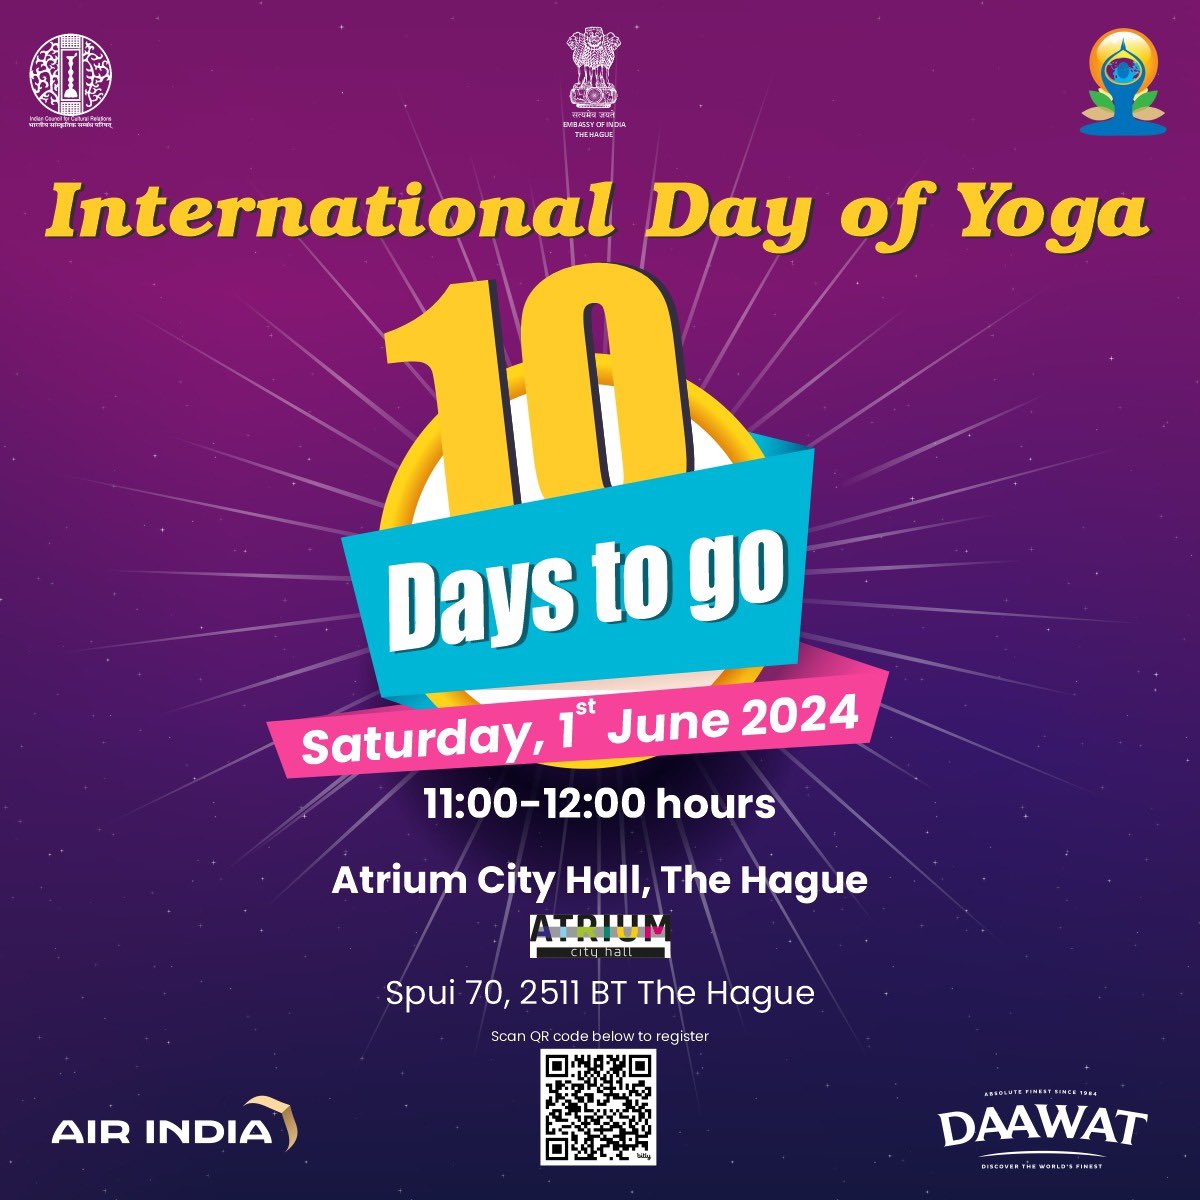 Join us for the 10th International Day of Yoga-2024 on 1st June @AtriumCityHall in association with @GemeenteDenHaag We encourage to carry your own yoga mat. Register @ bit.ly/4b7fWIY or scan QR code👇 #IDY2024 #InternationalDayofYoga2024